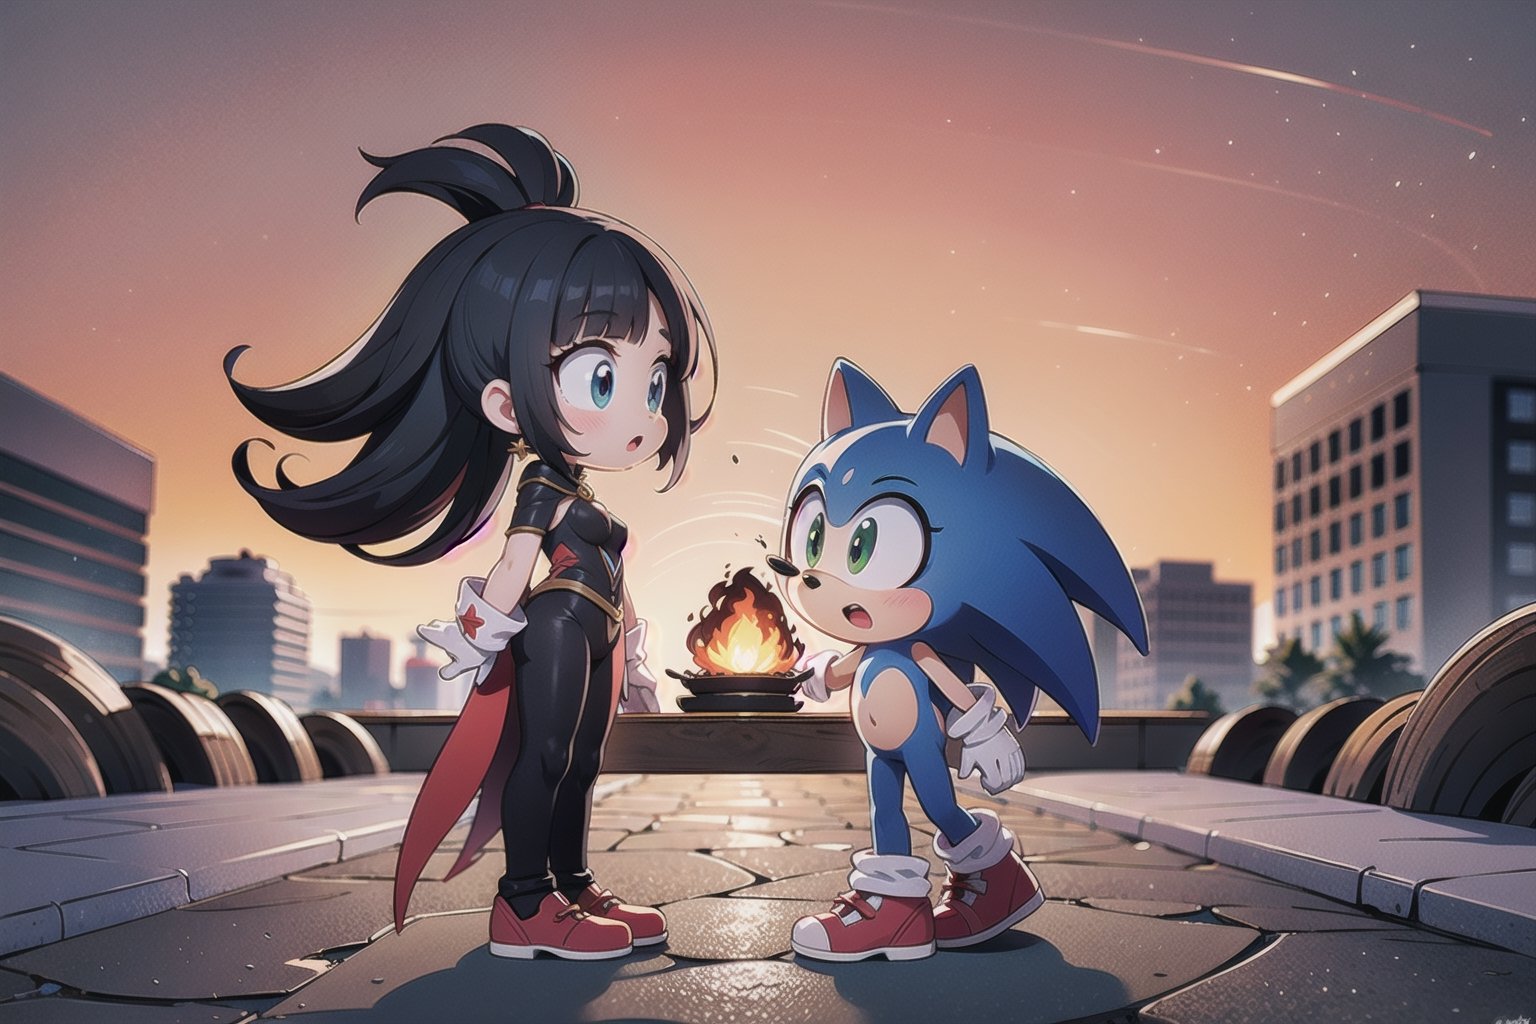 Against a backdrop of ravaged Looney Island, Monadef and Sonic the Hedgehog stand defiant, their dark silhouettes etched against a fiery orange sky. Sonic the Hedgehog stands by her side, his blue spikes and red shoes a vivid splash against the dull gray stone. Every detail of their forms is rendered in stunning 32K UHD, as if they might step out of the frame at any moment.